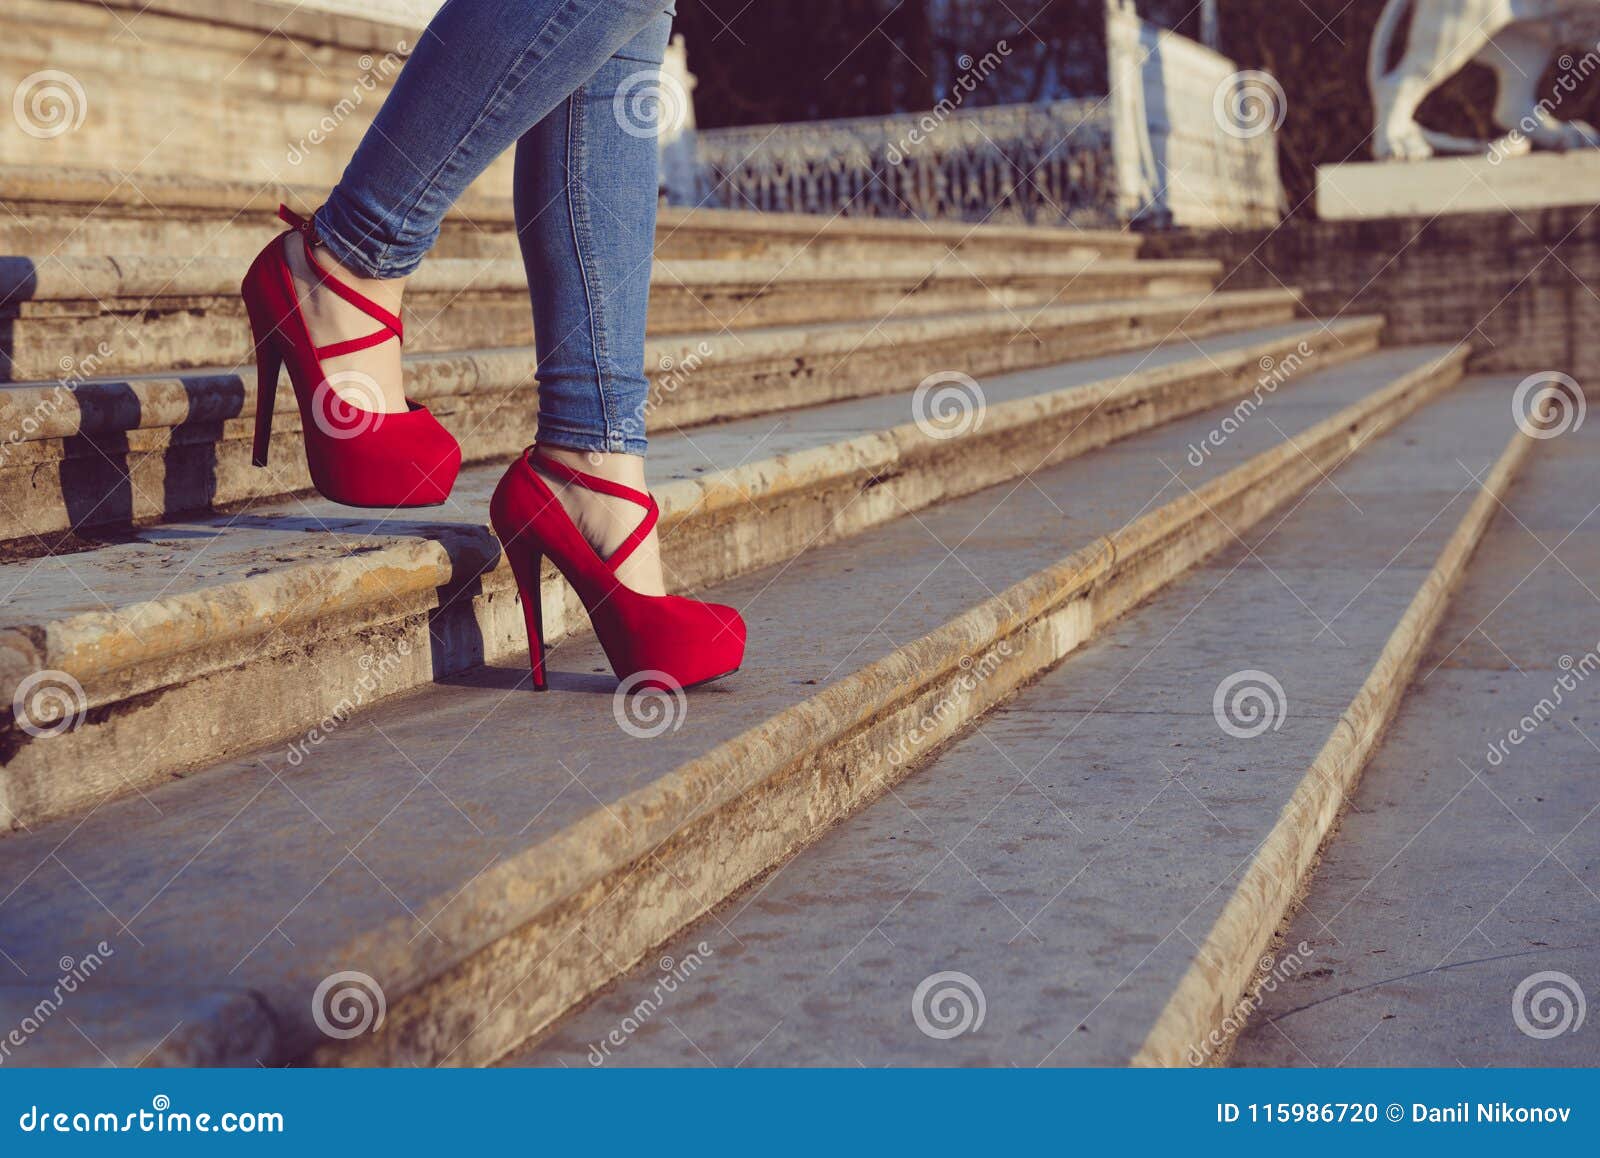 Woman Wearing Blue Jeans and Red High Heel Shoes in Old Town. the Women ...